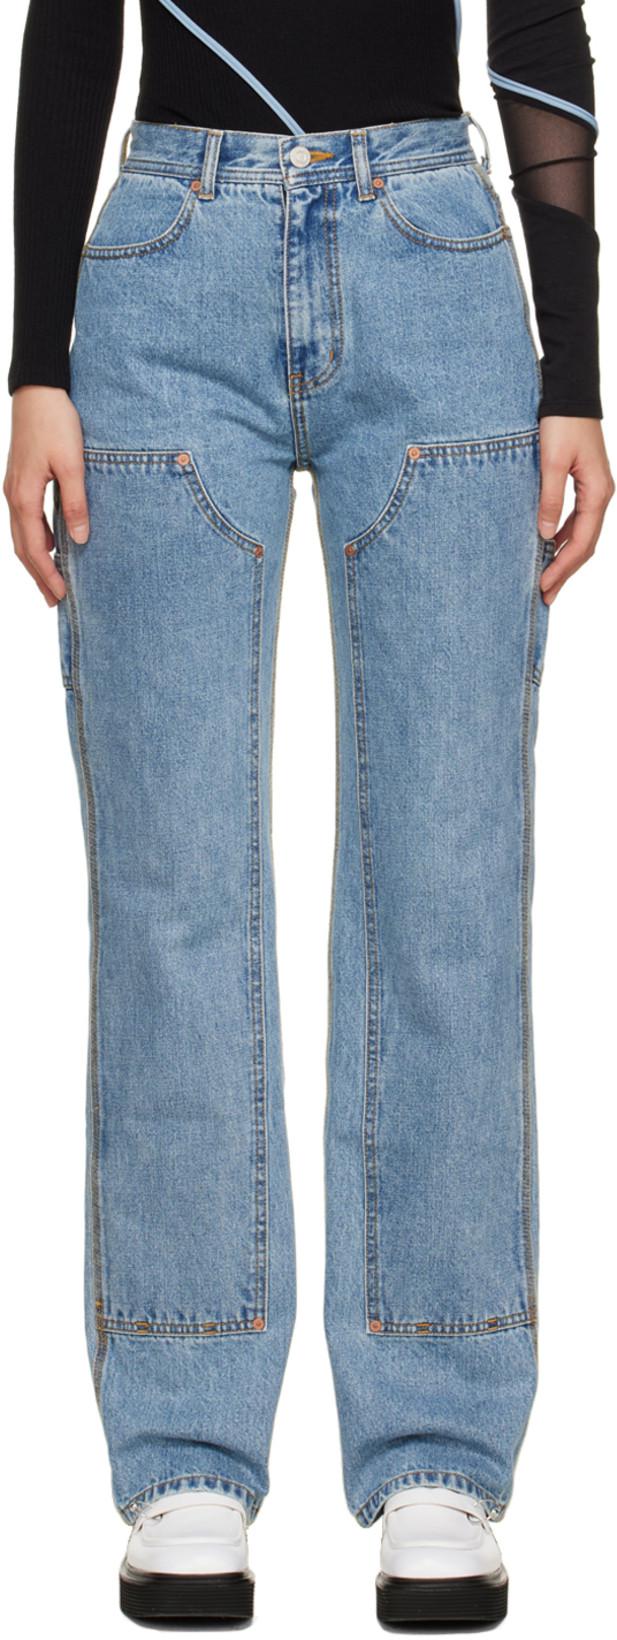 SSENSE Exclusive Blue Jade Jeans by ANDERSSON BELL